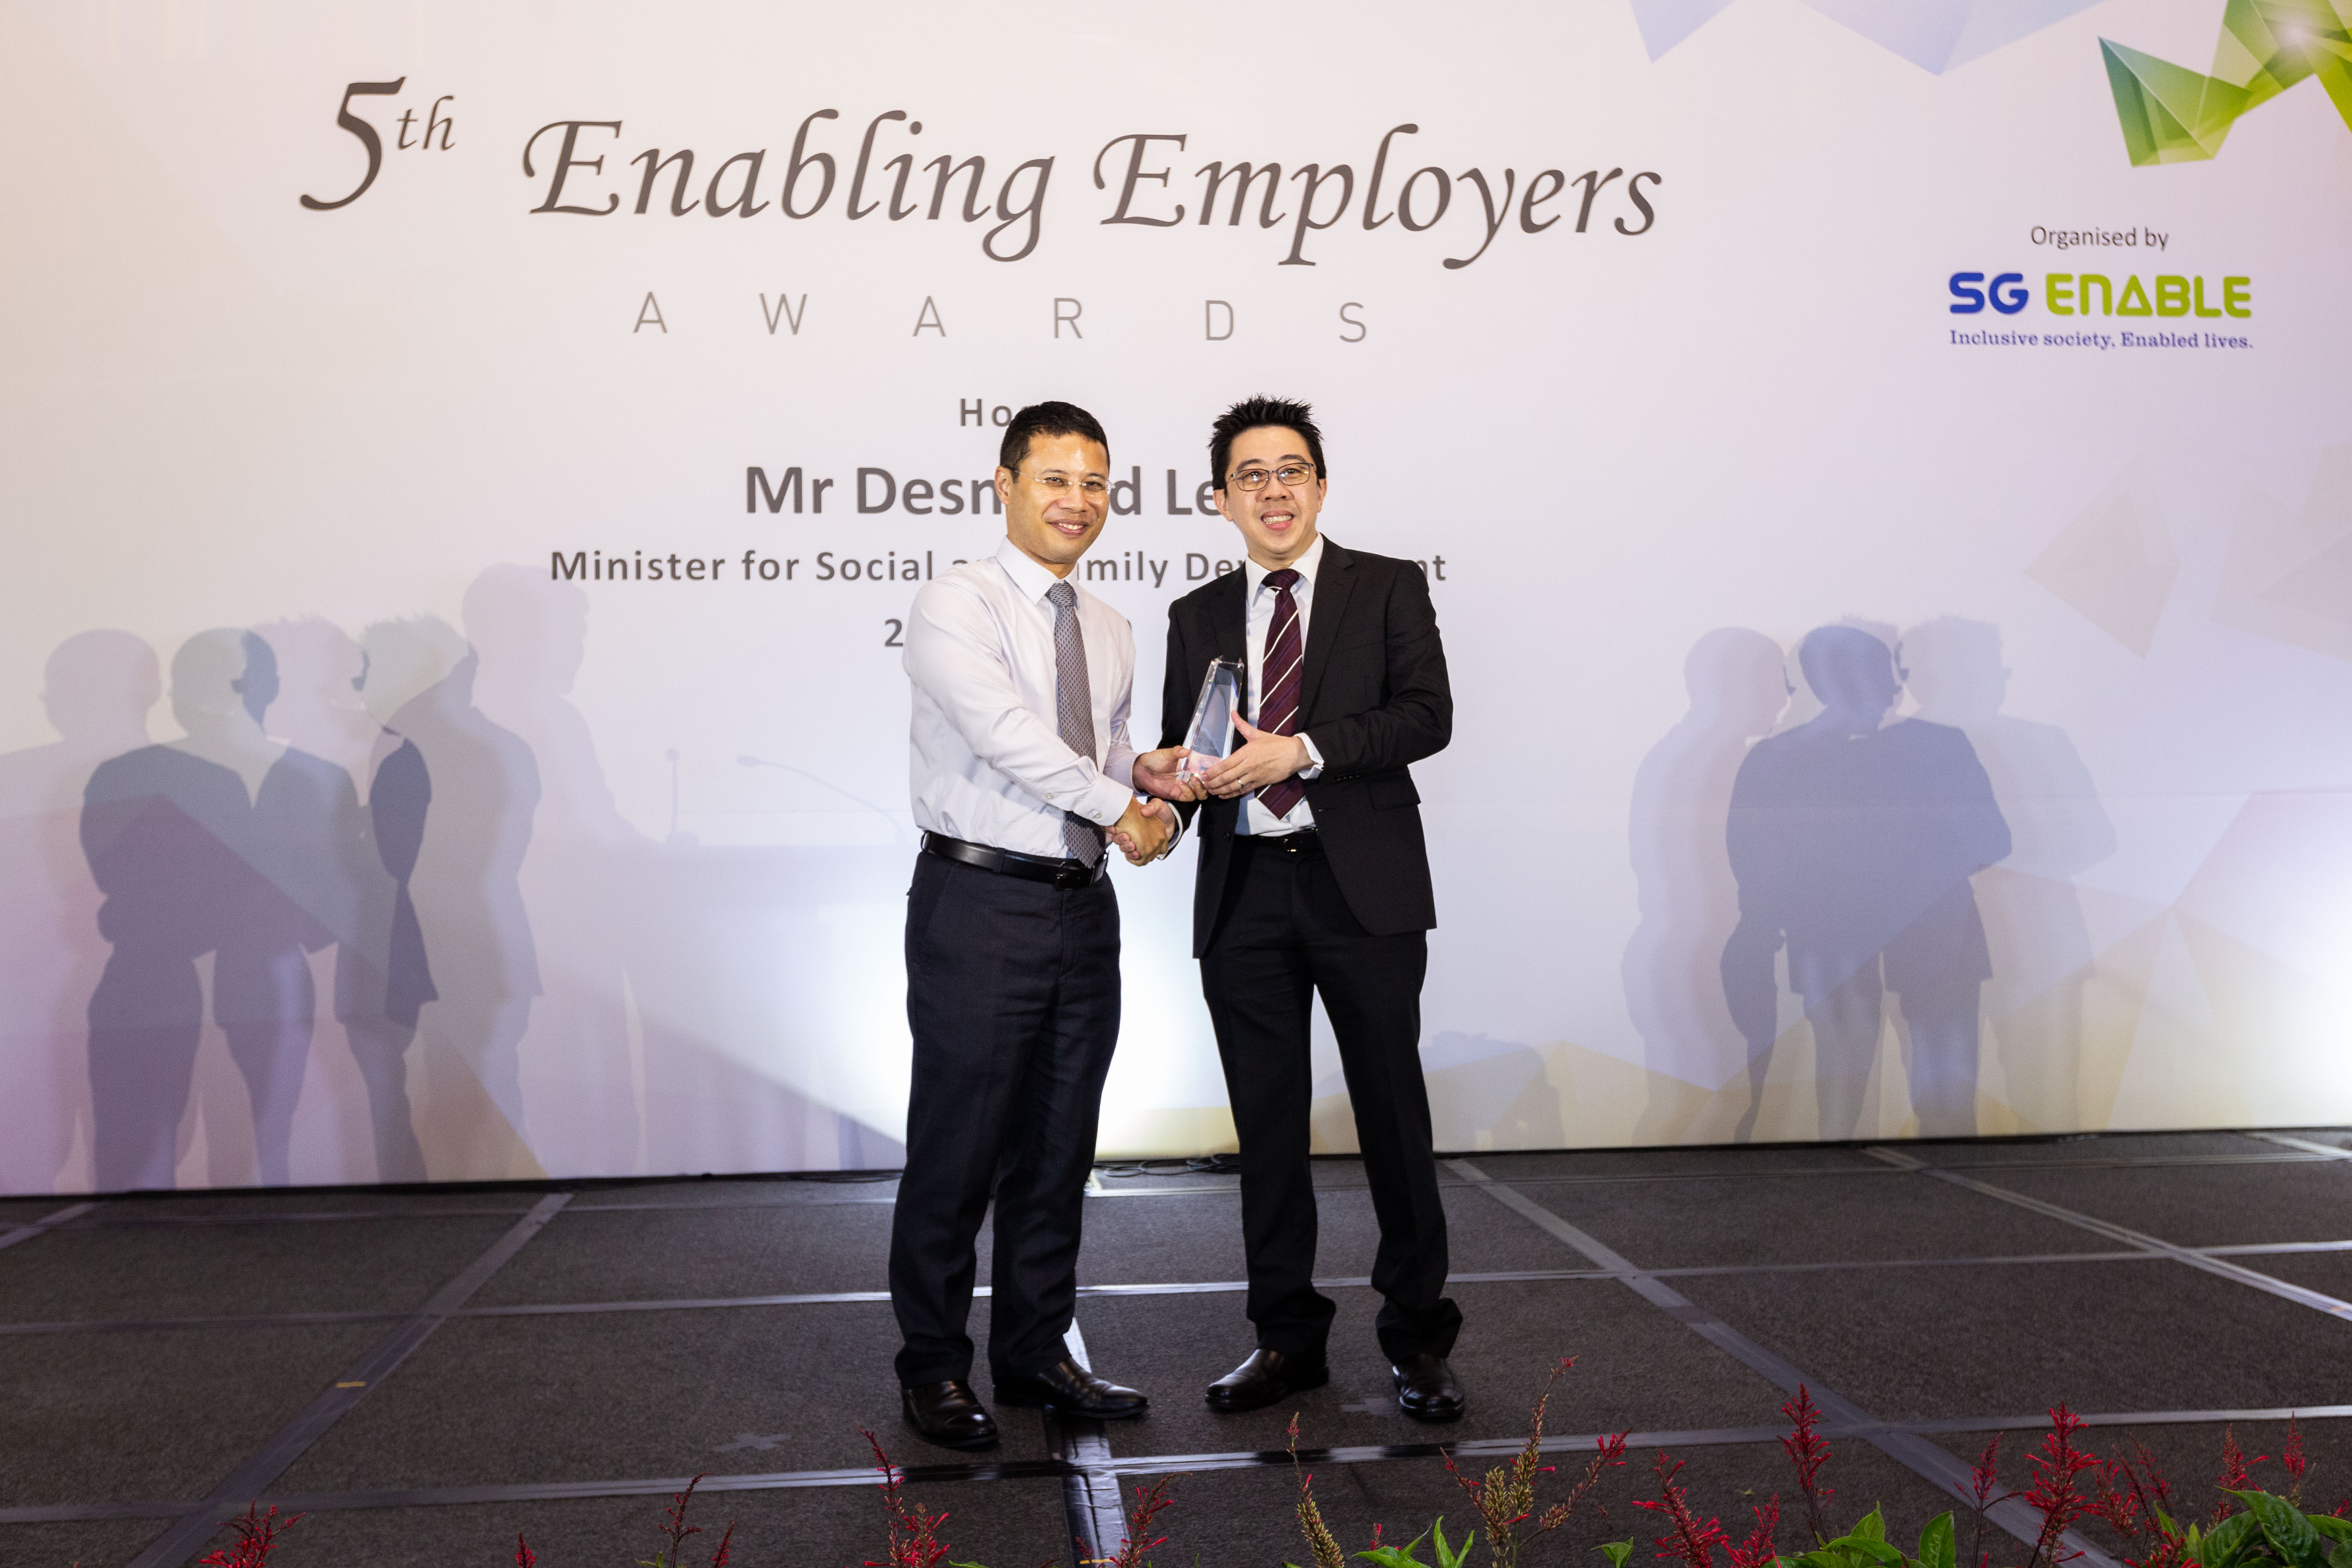 George (right) receiving the Enabling Champion Award at the 5th Enabling Employers Awards from Minister for Social and Family Development Desmond Lee.